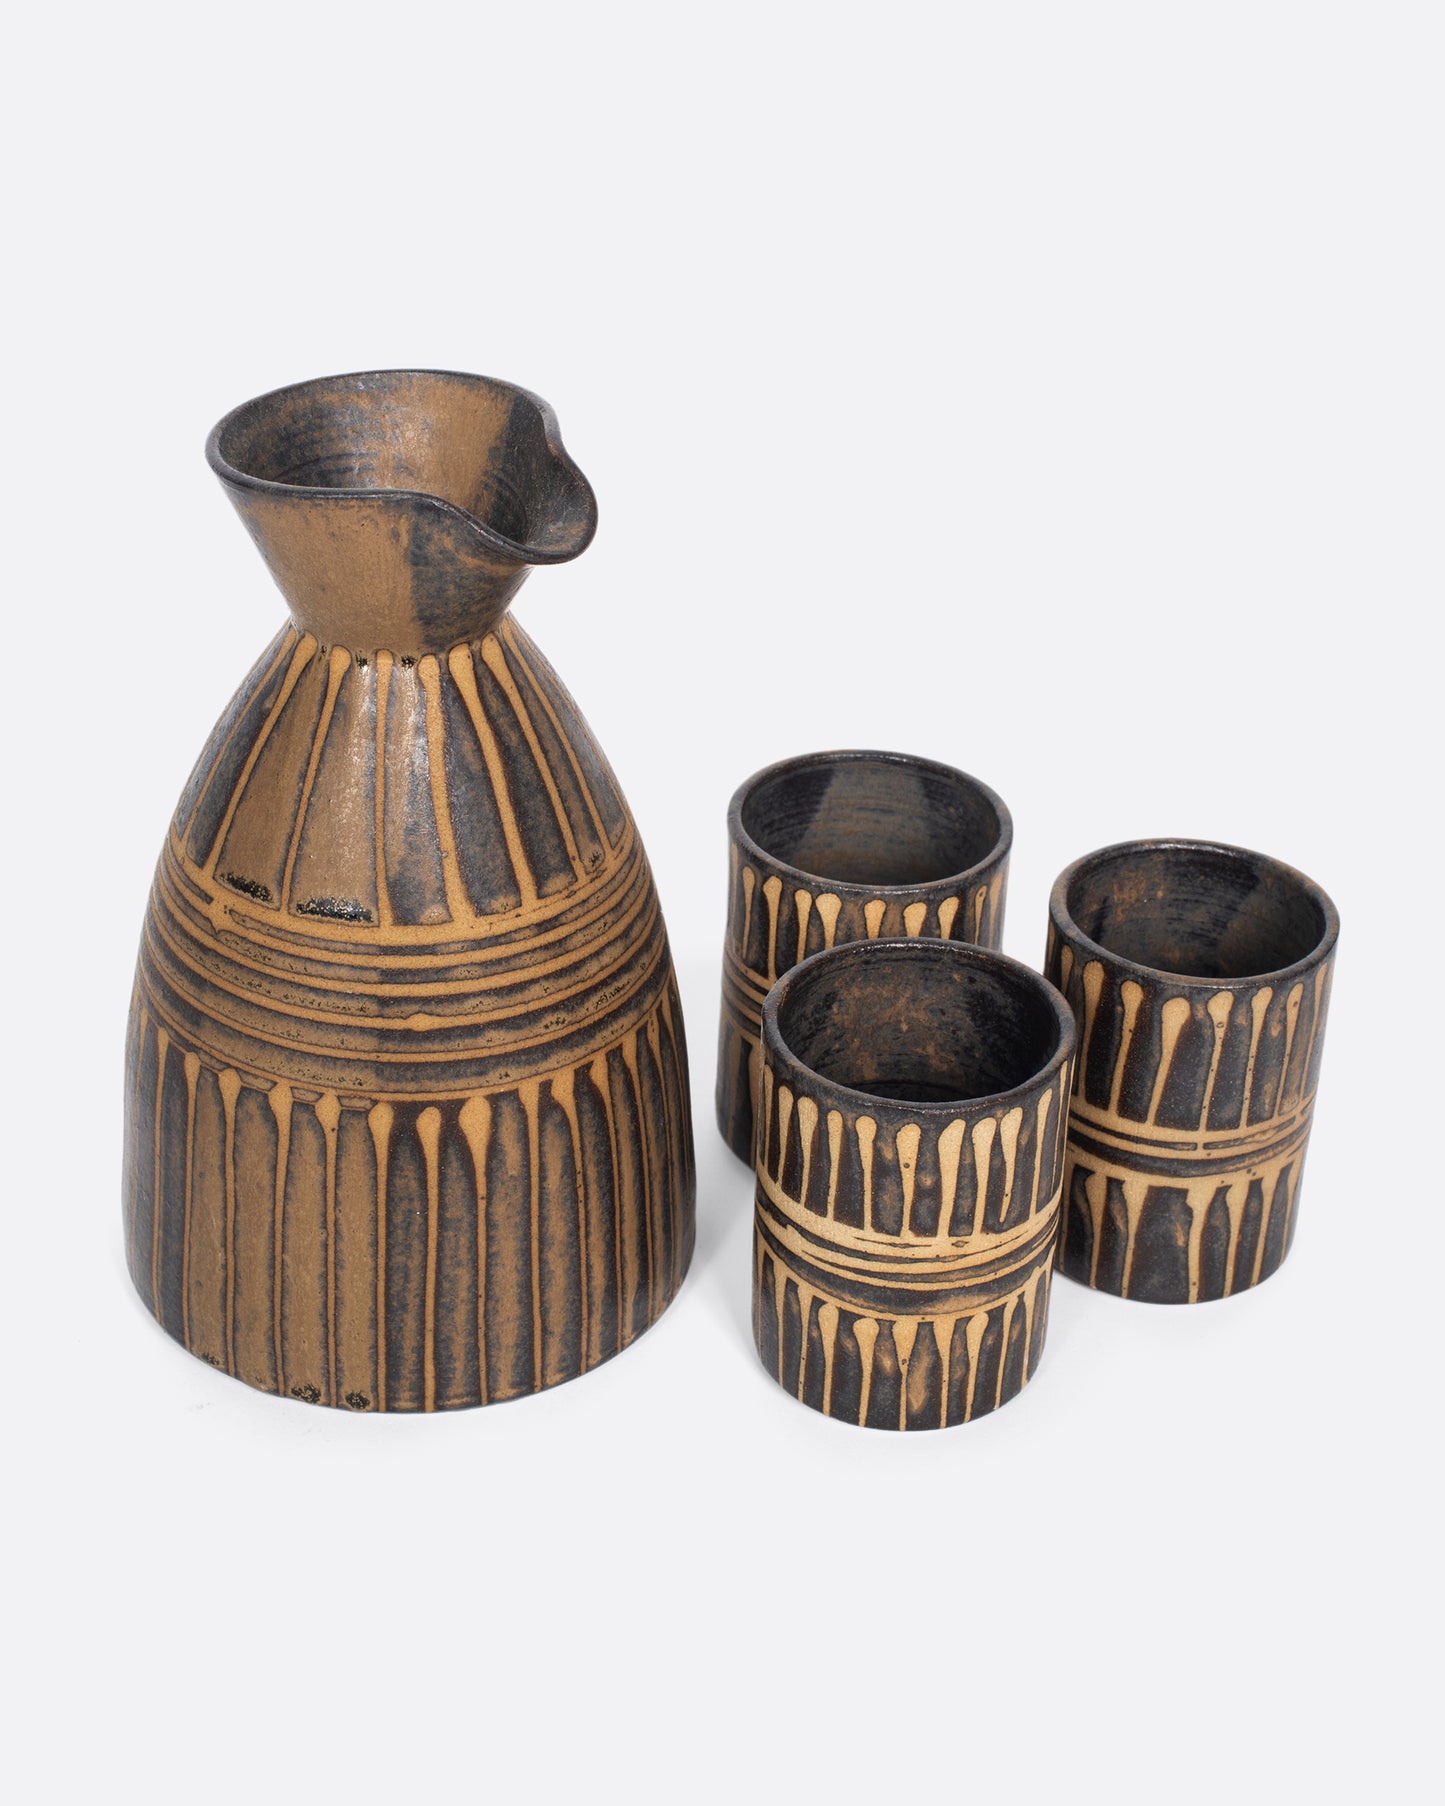 This vintage ceramic sake decanter set includes three cups, all with a matching incised light brown glaze, that creates a rich, textured look.